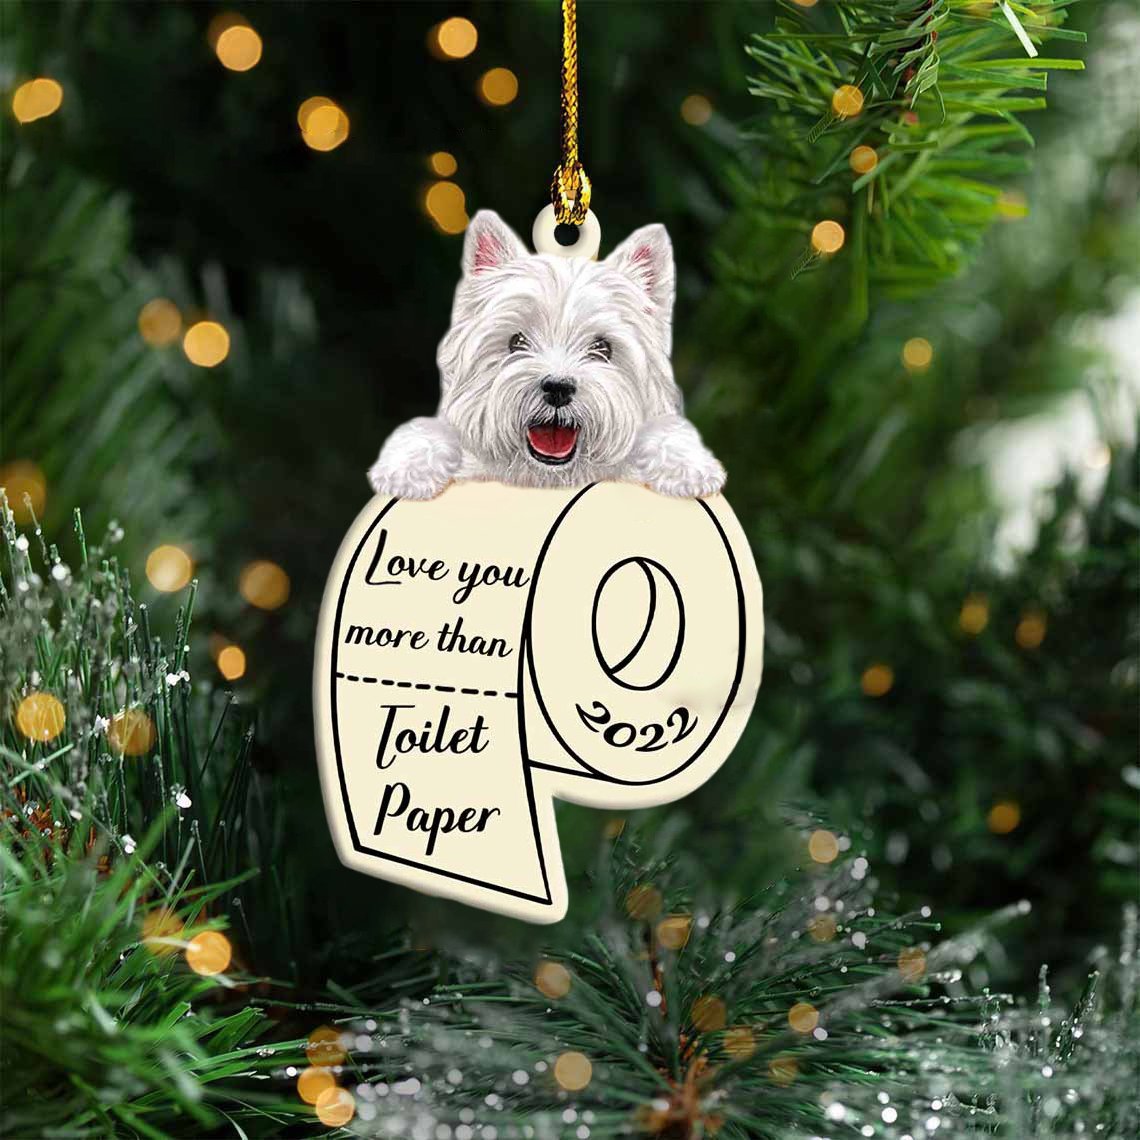 West Highland White Terrier Love You More Than Toilet Paper 2022 Hanging Ornament